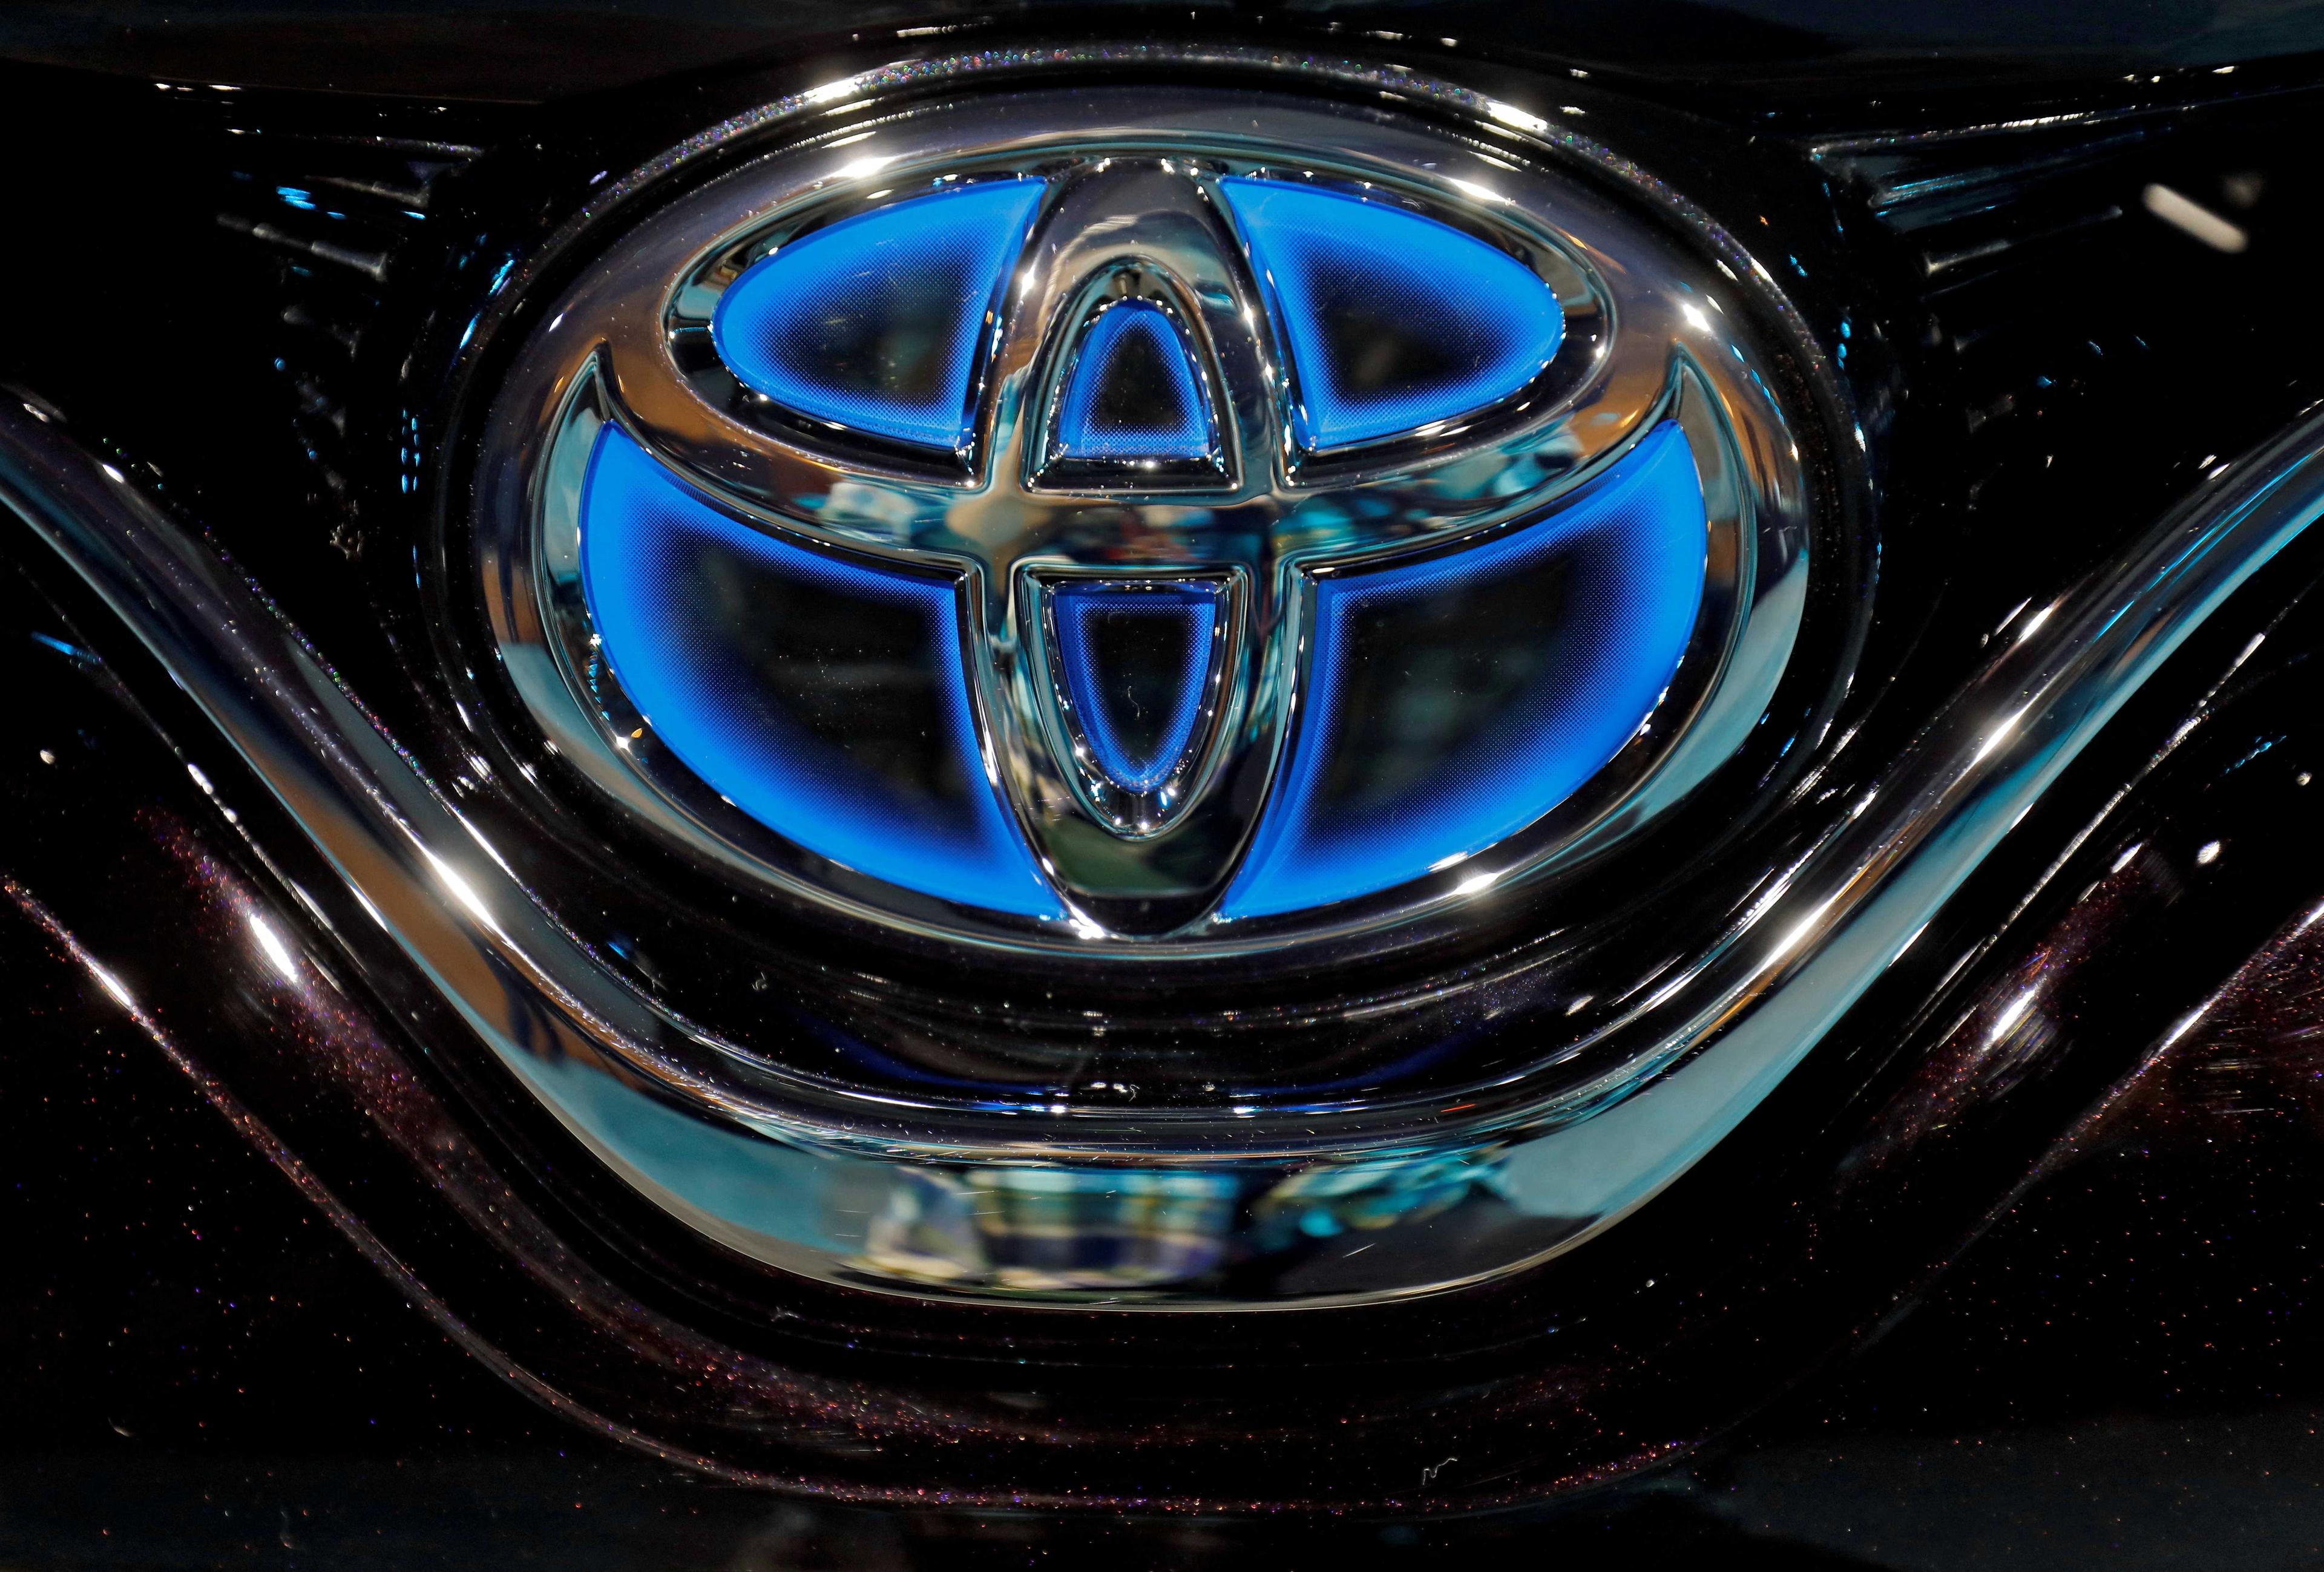 The Toyota logo is seen on the bonnet  in New Delhi, India, Jan 18, 2019. Photo: Reuters